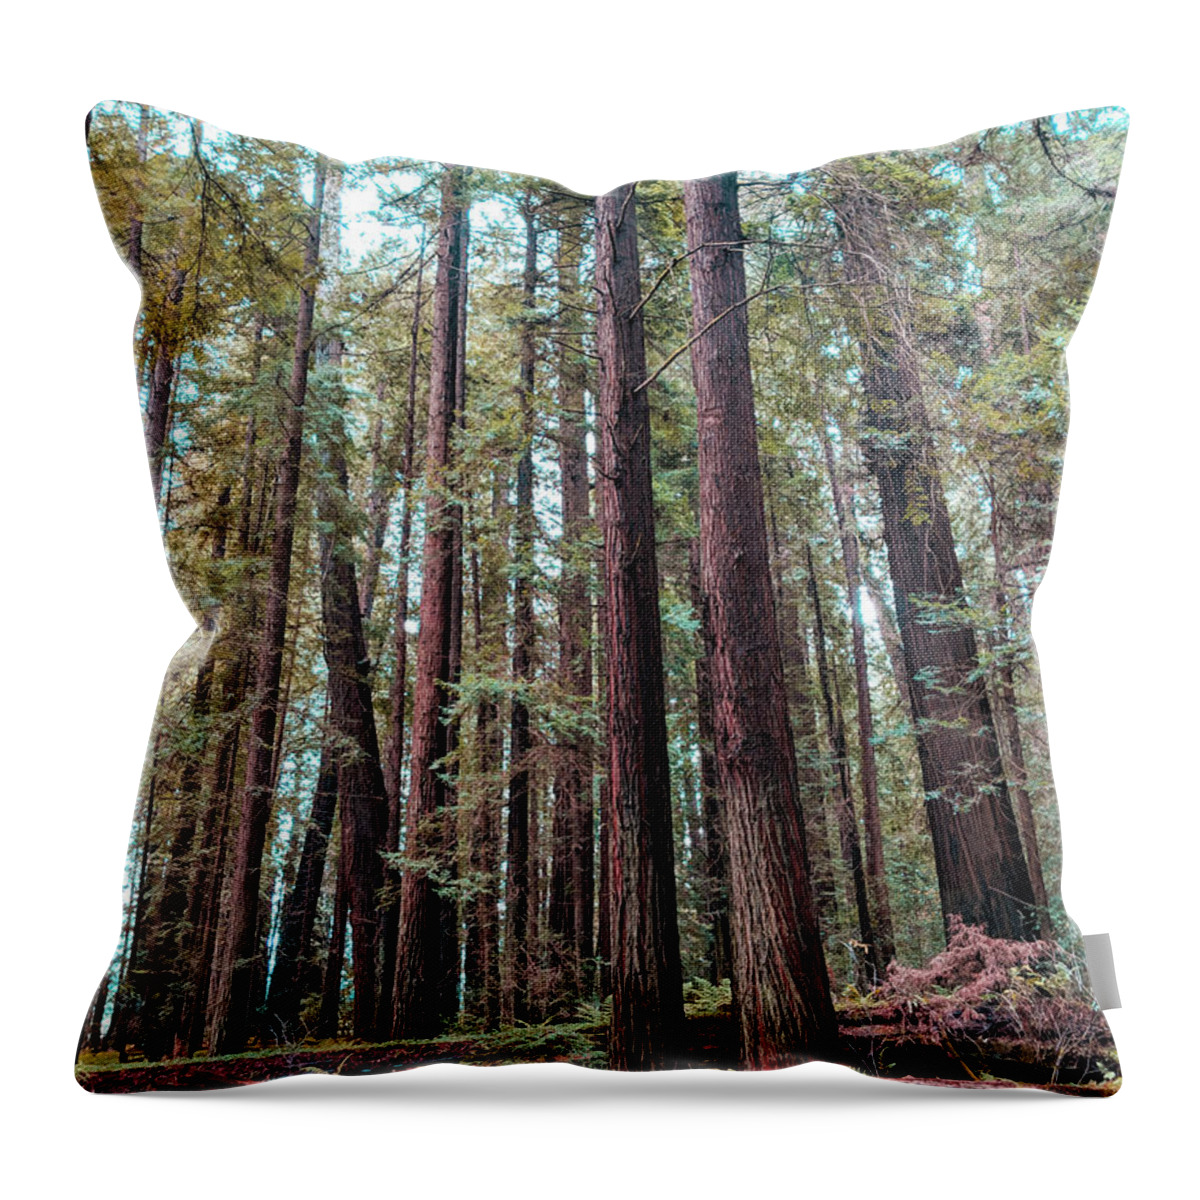 Redwoods Throw Pillow featuring the photograph Twin Redwoods by Jera Sky